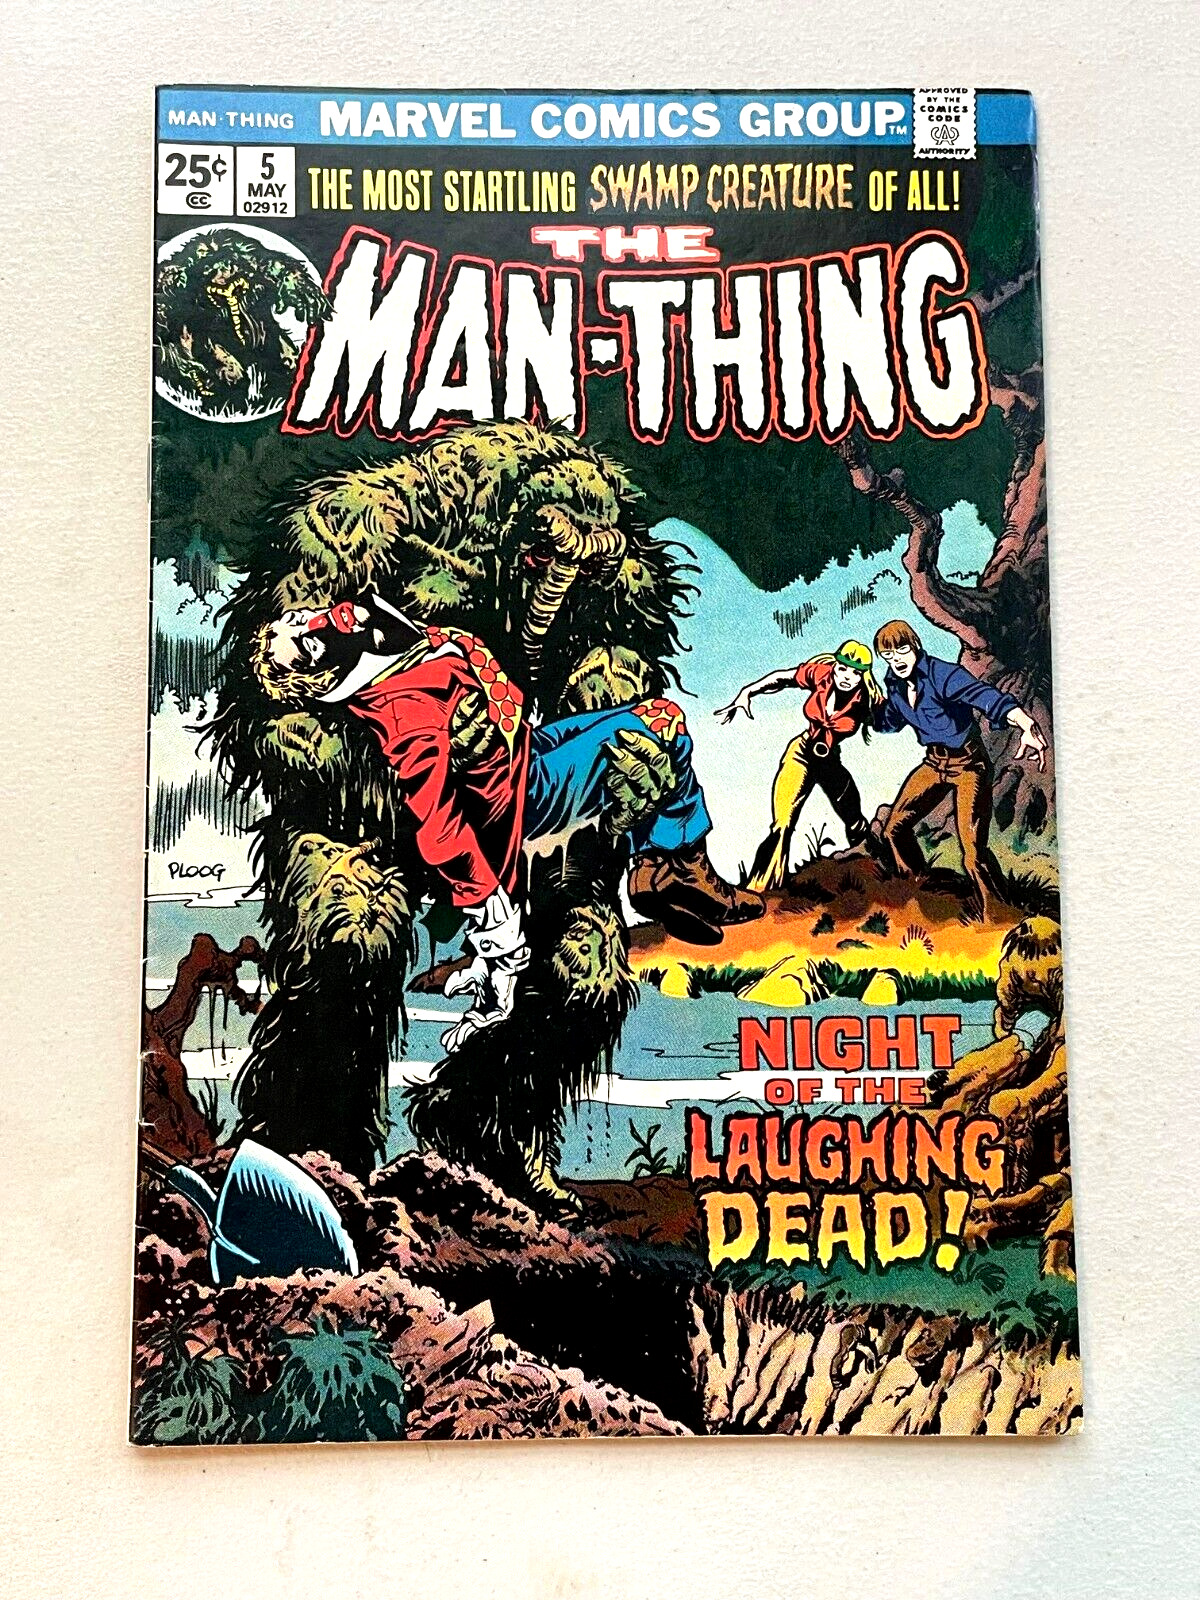 The Man-Thing #5 (Marvel 1974) F/VF, Ploog cover, Night of the Laughing Dead